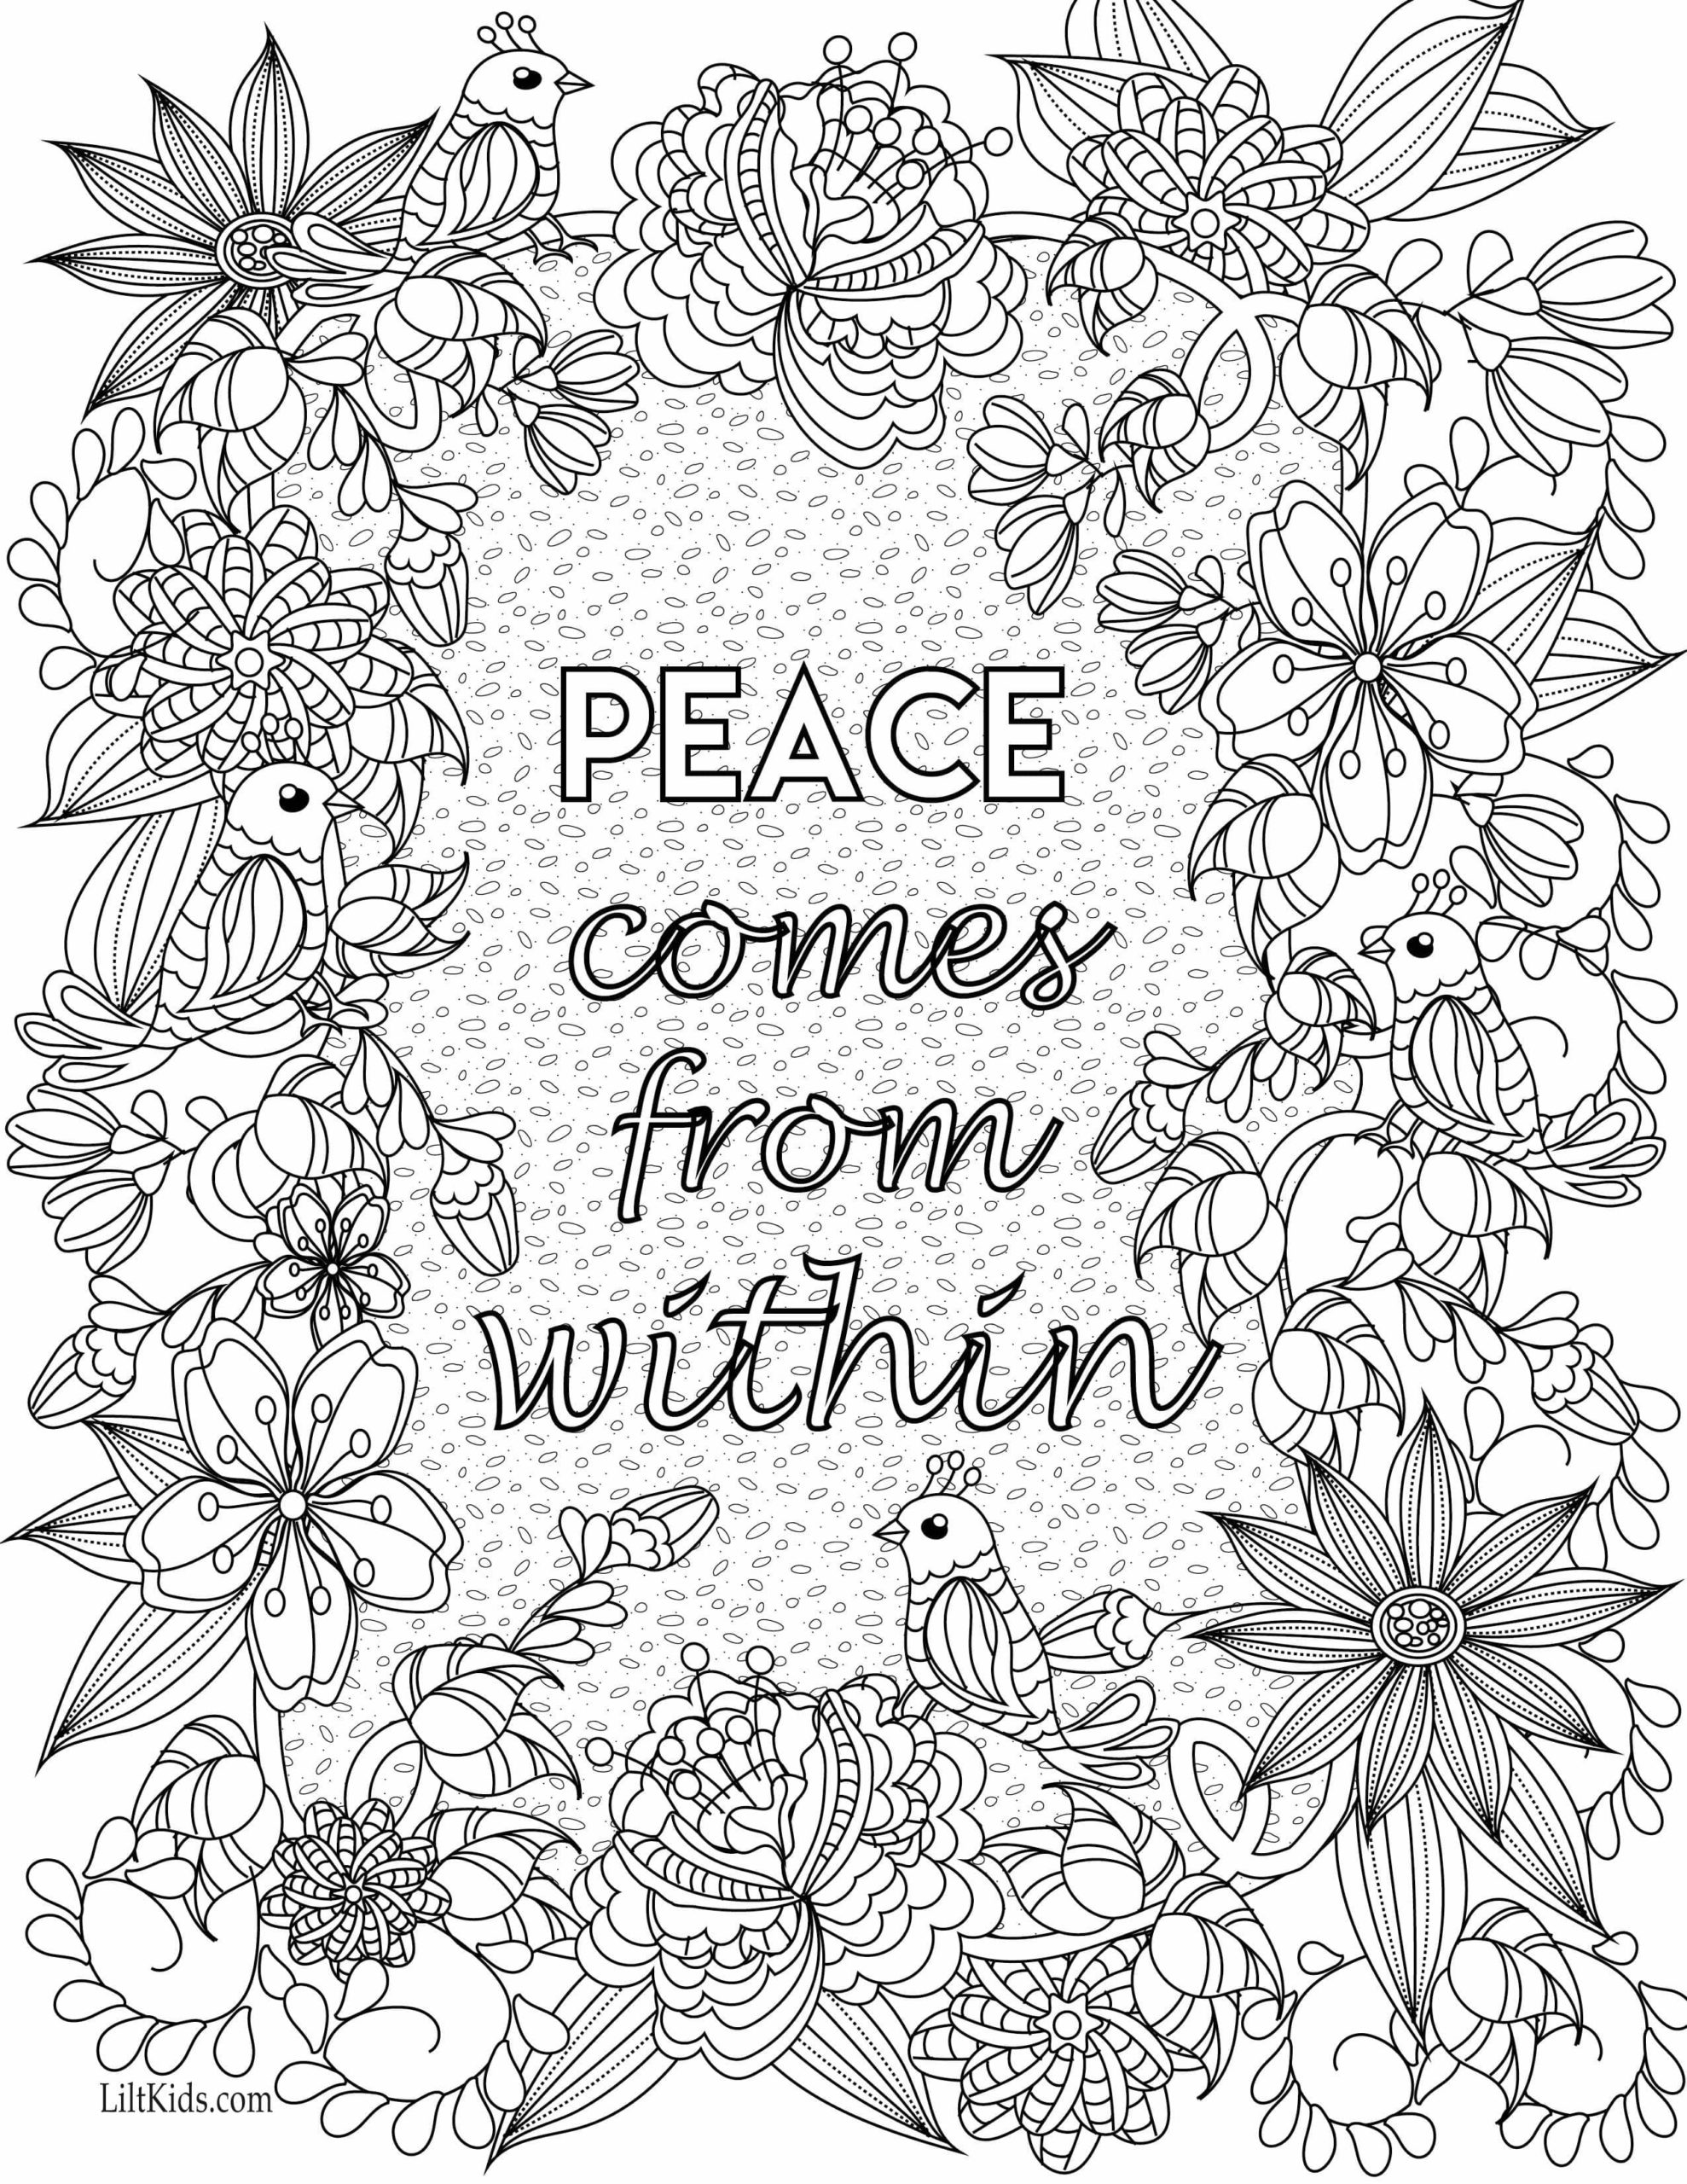 free online coloring pages for adults | inspirational coloring pages printable | inspirational coloring pages for adults pdf